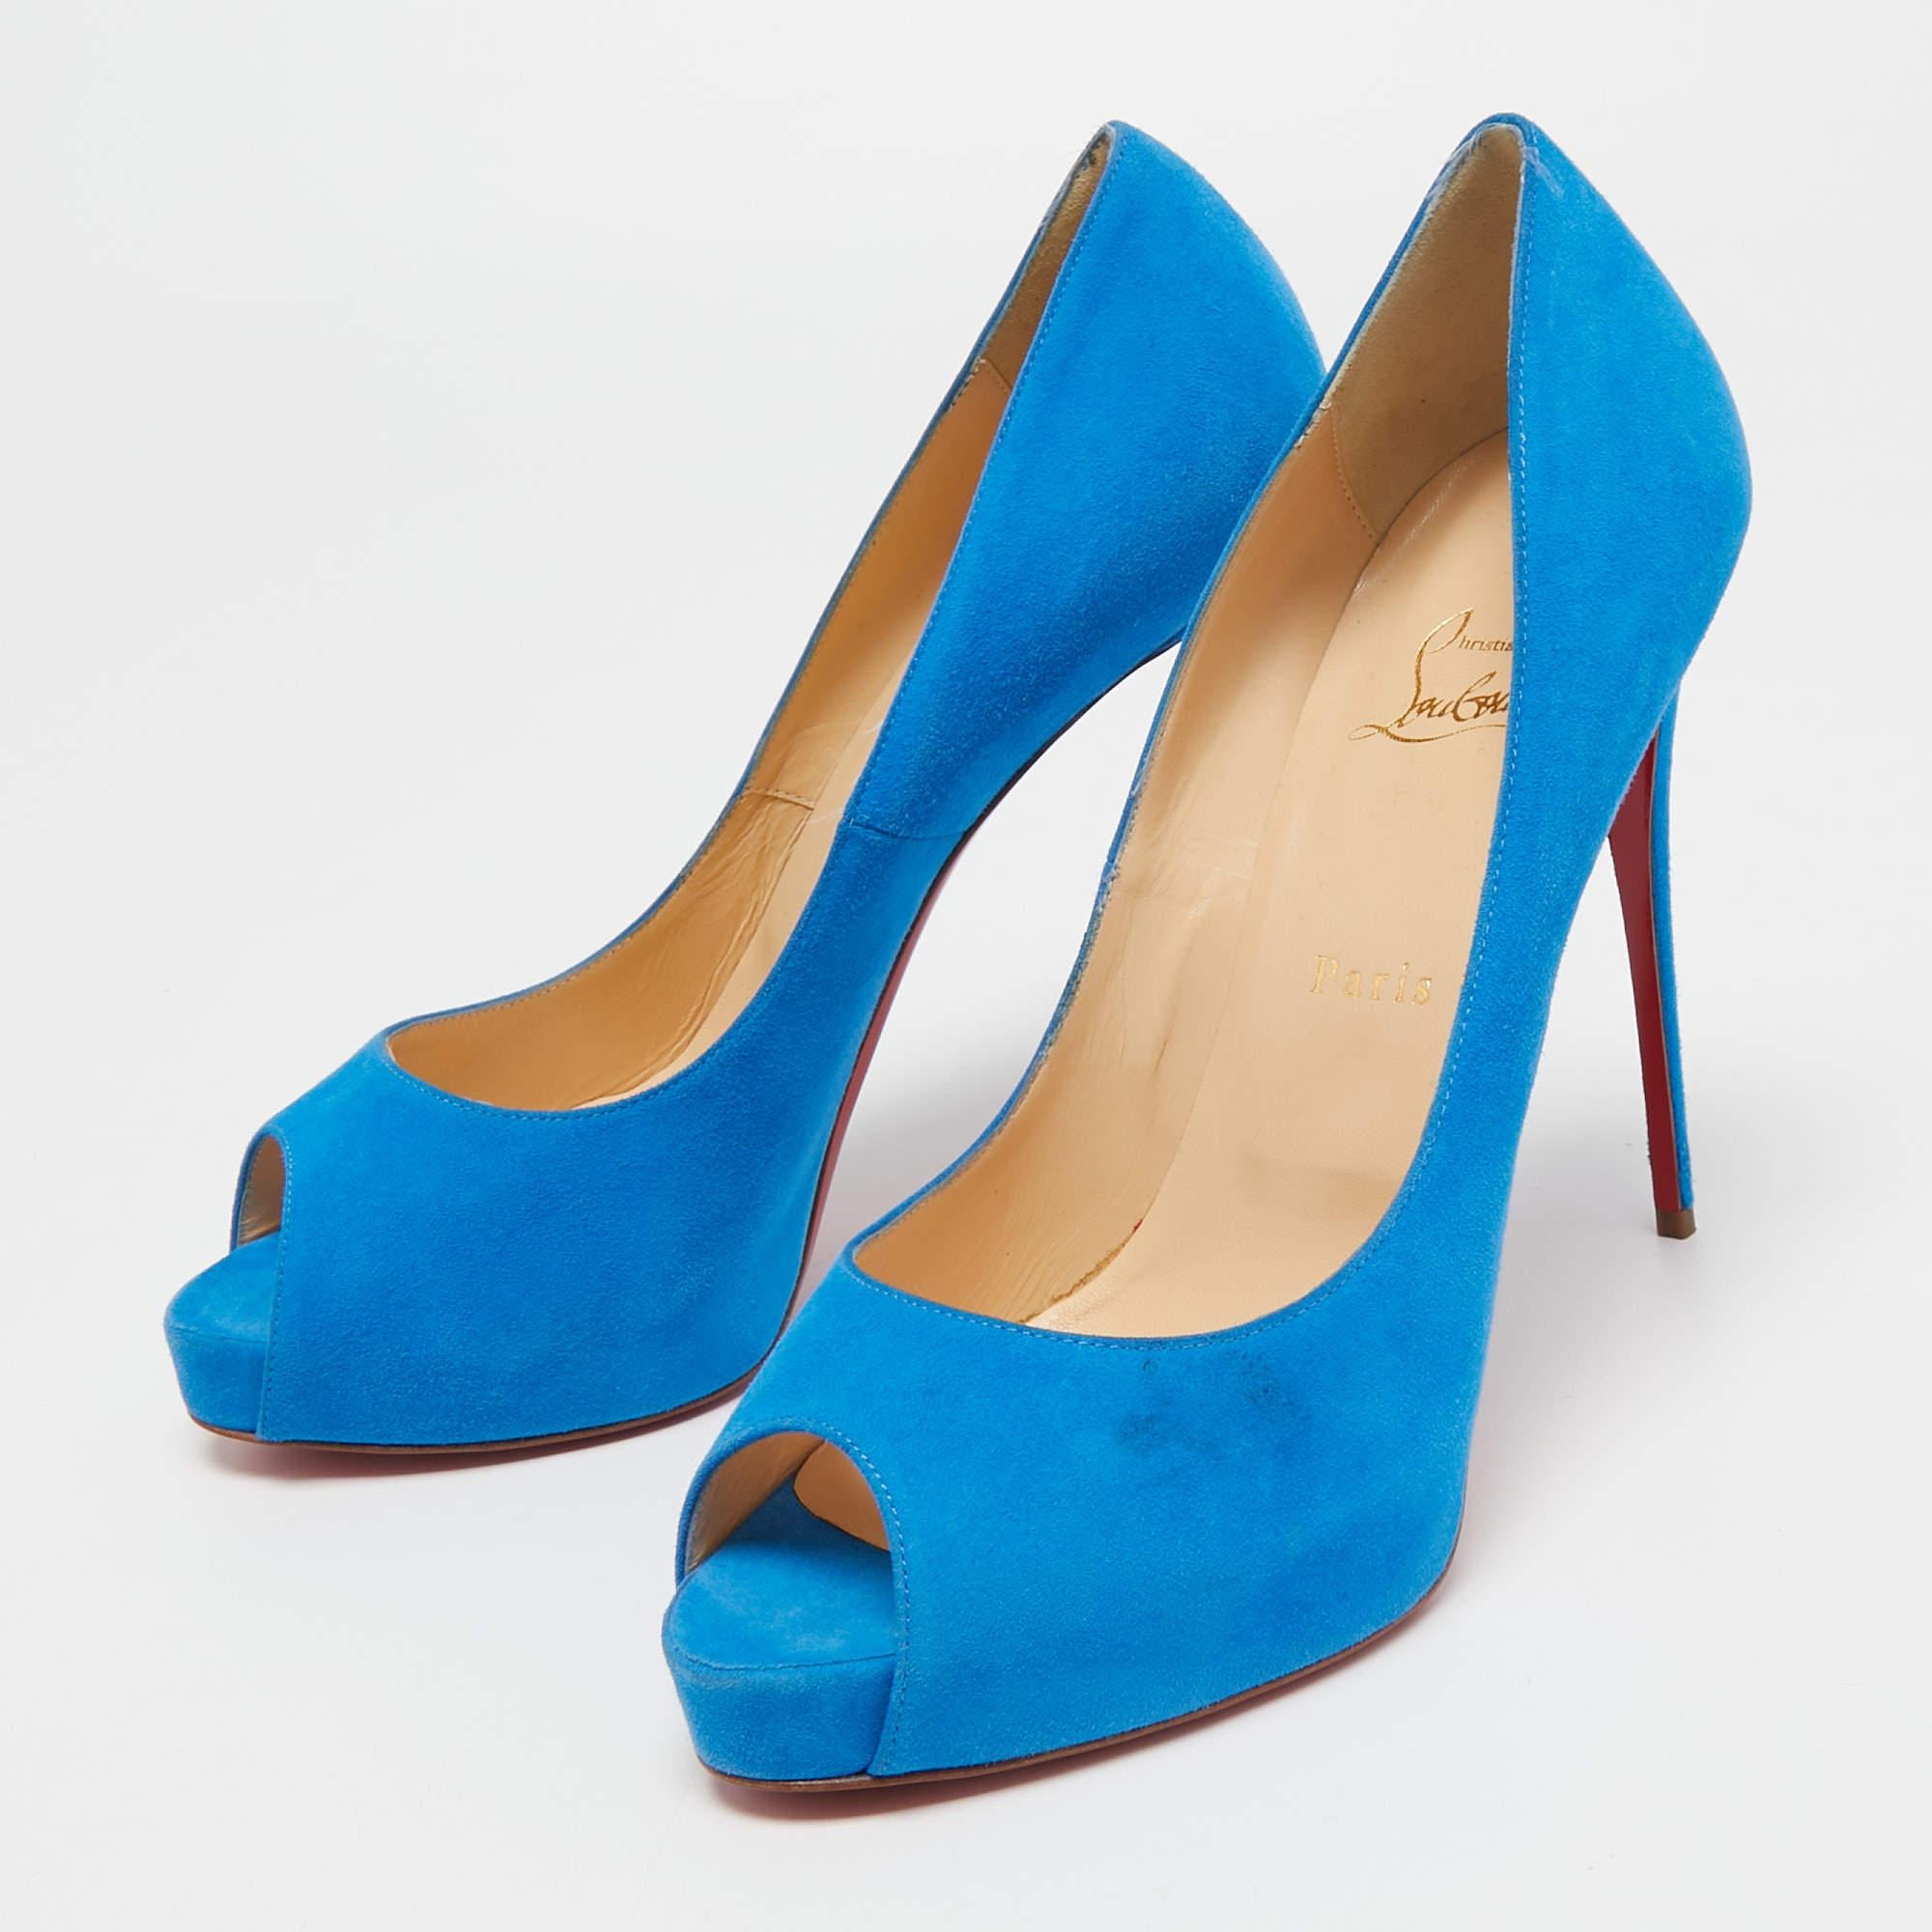 Women's Christian Louboutin Blue Suede New Very Prive Pumps Size 40.5